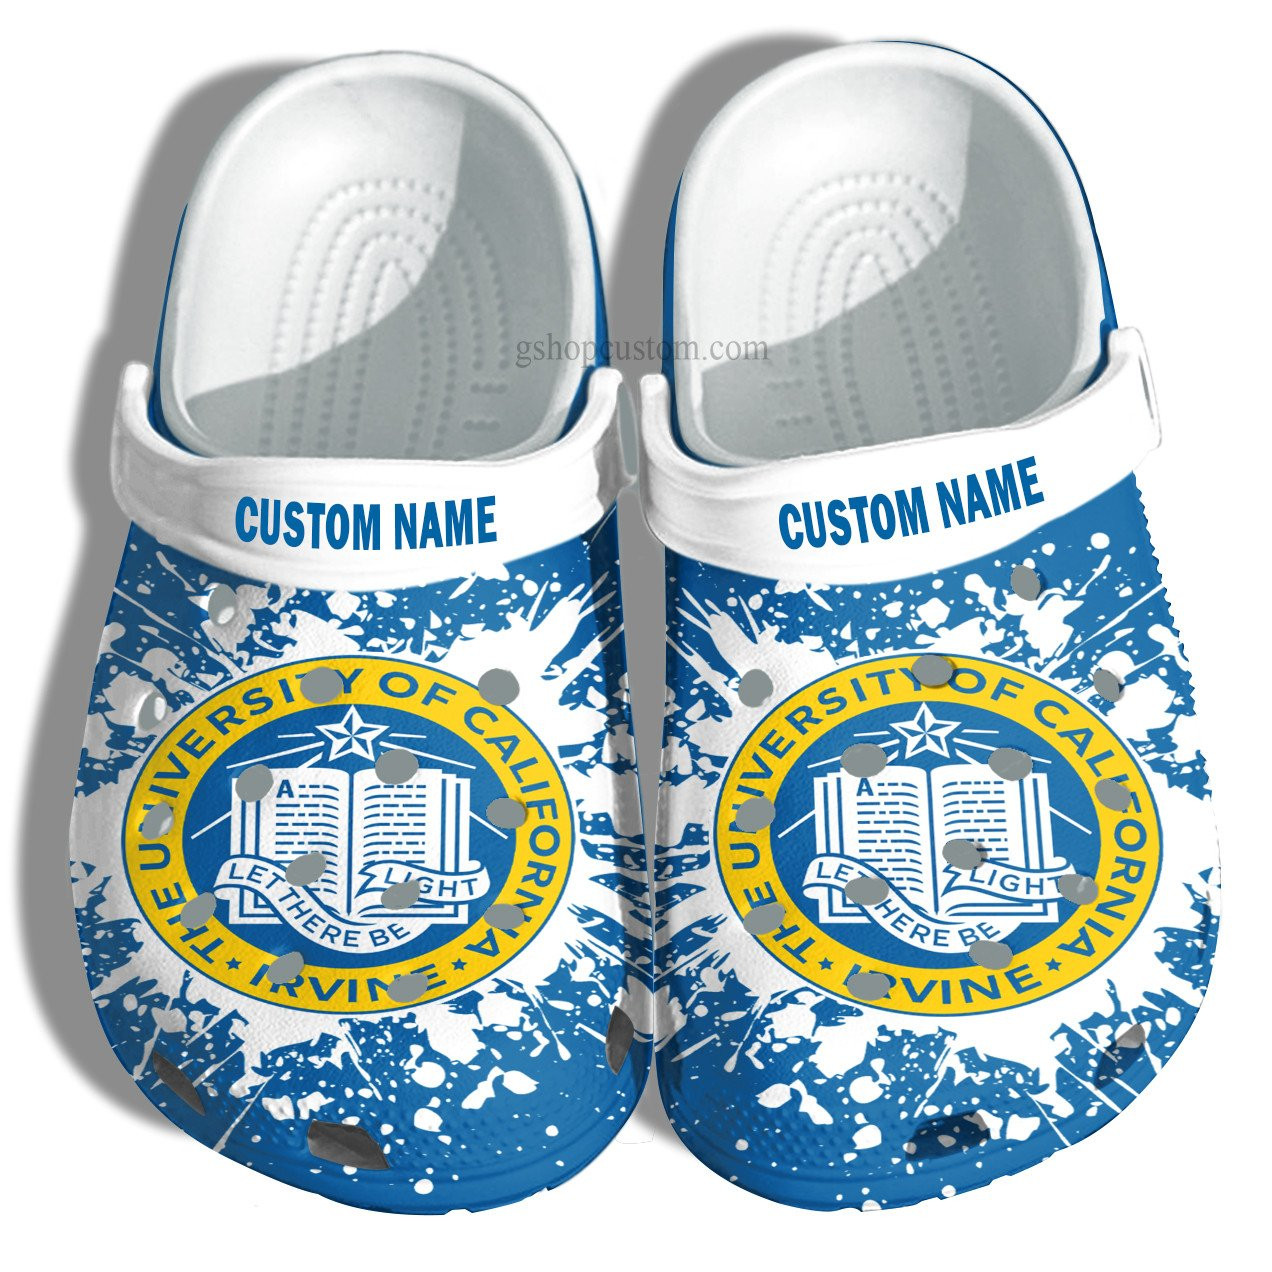 University Of California Graduation Gifts Croc Shoes Customize- Admission Gift Crocs Shoes